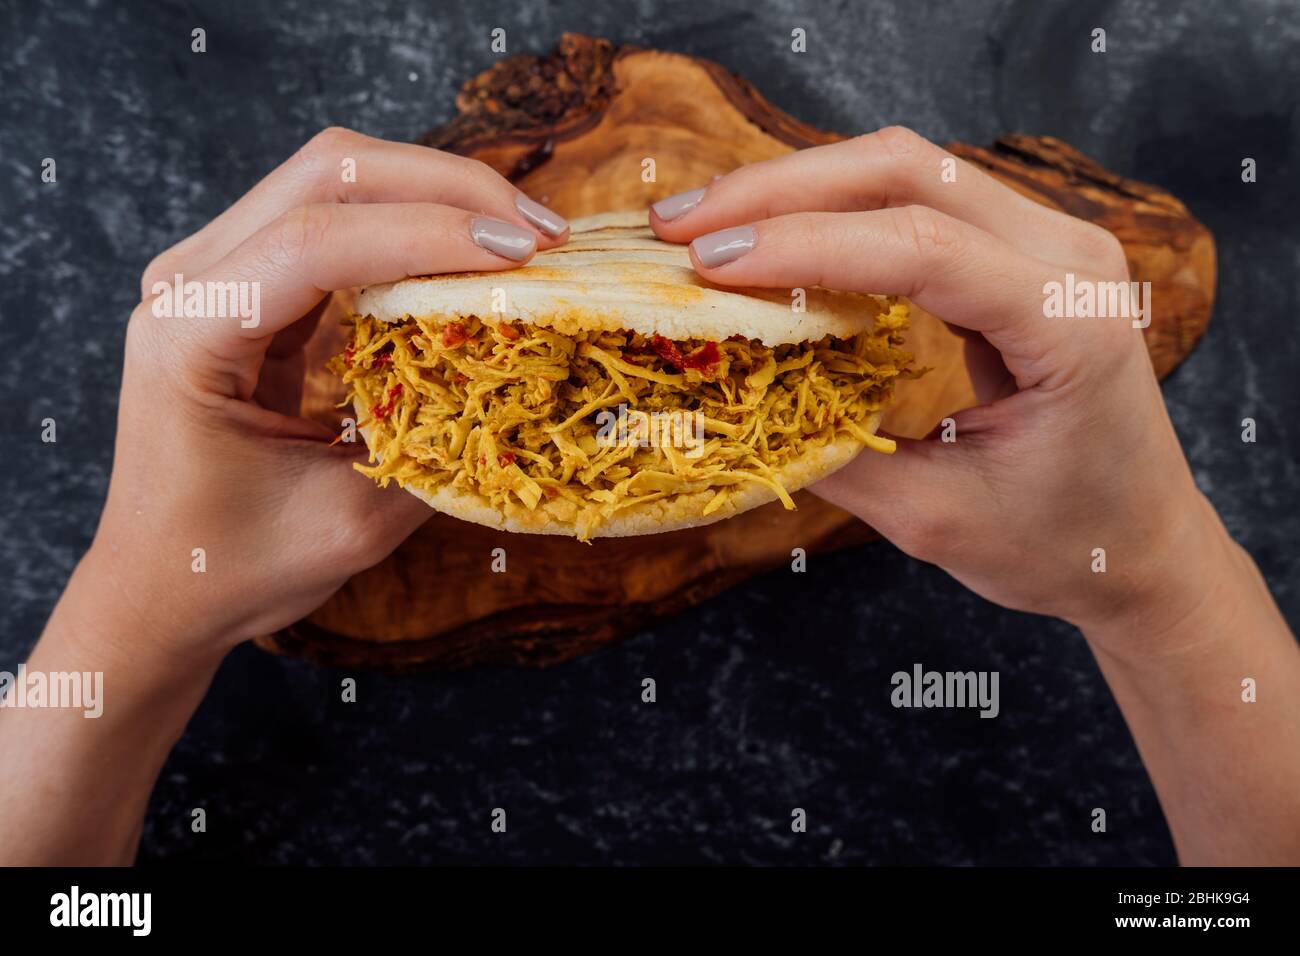 Woman holding a chicken arepa typical of Latin American cuisine. Stock Photo